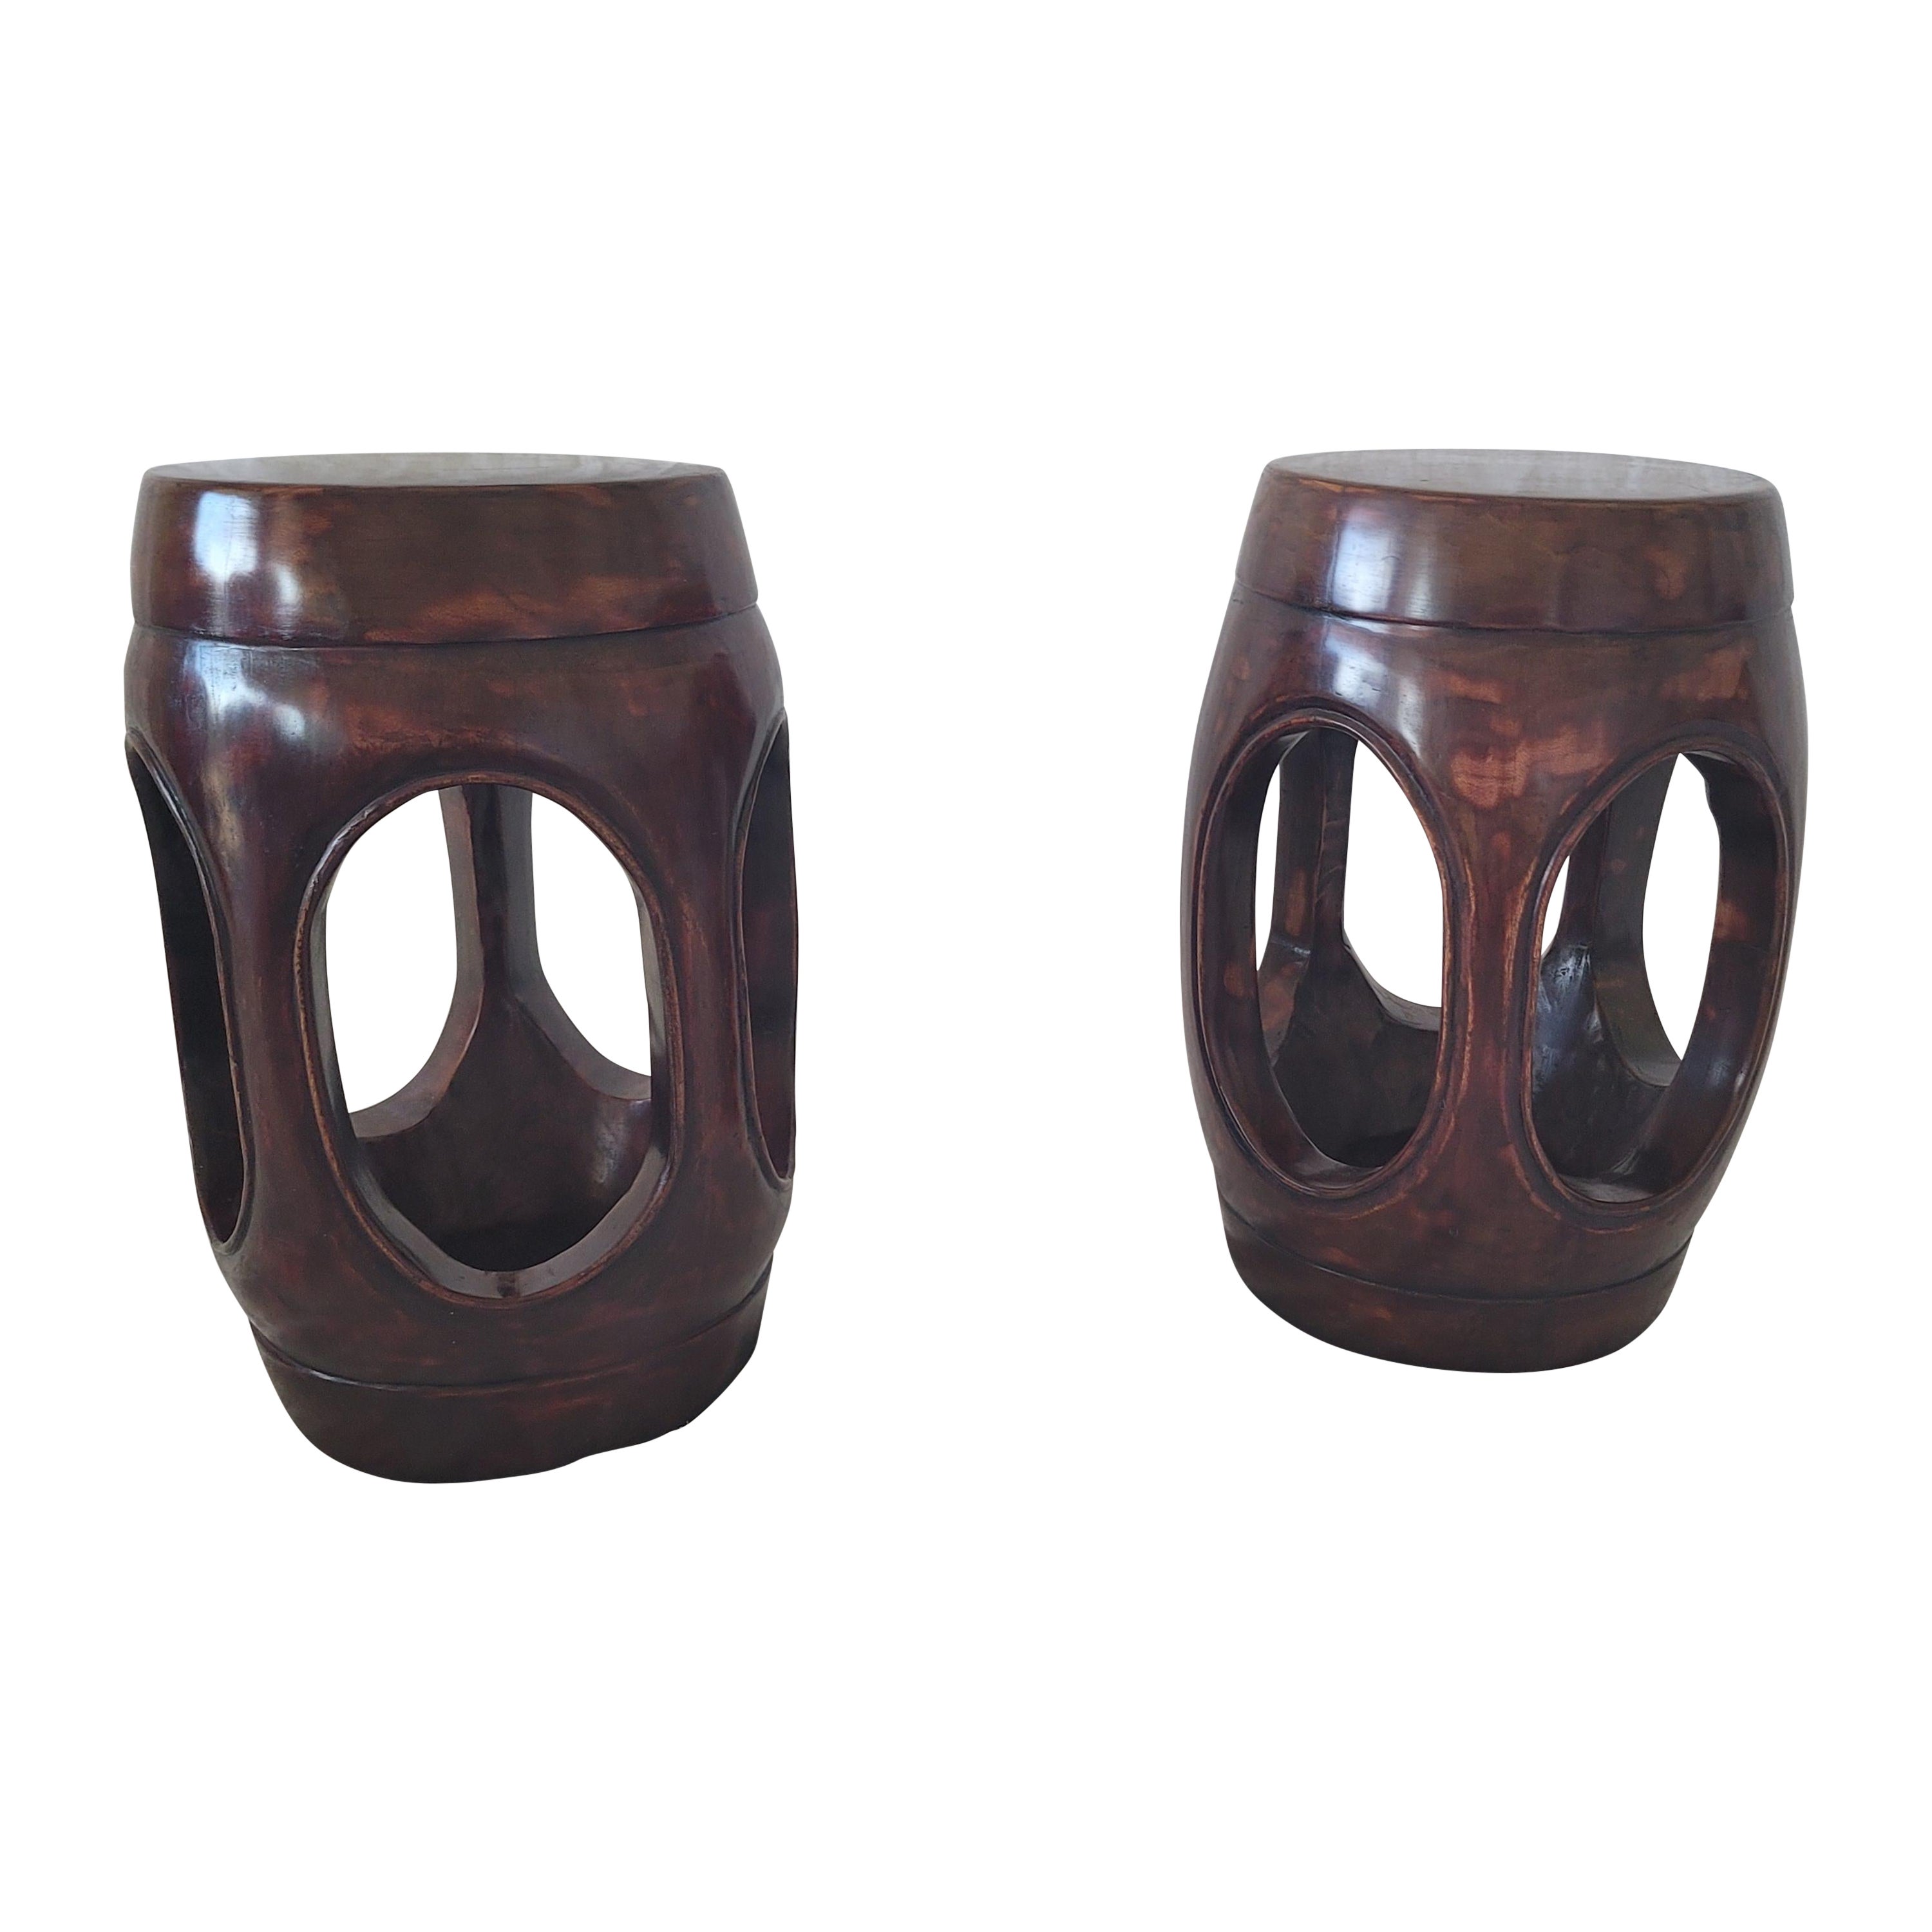 21st Century Lacquer Drum Stools For Sale